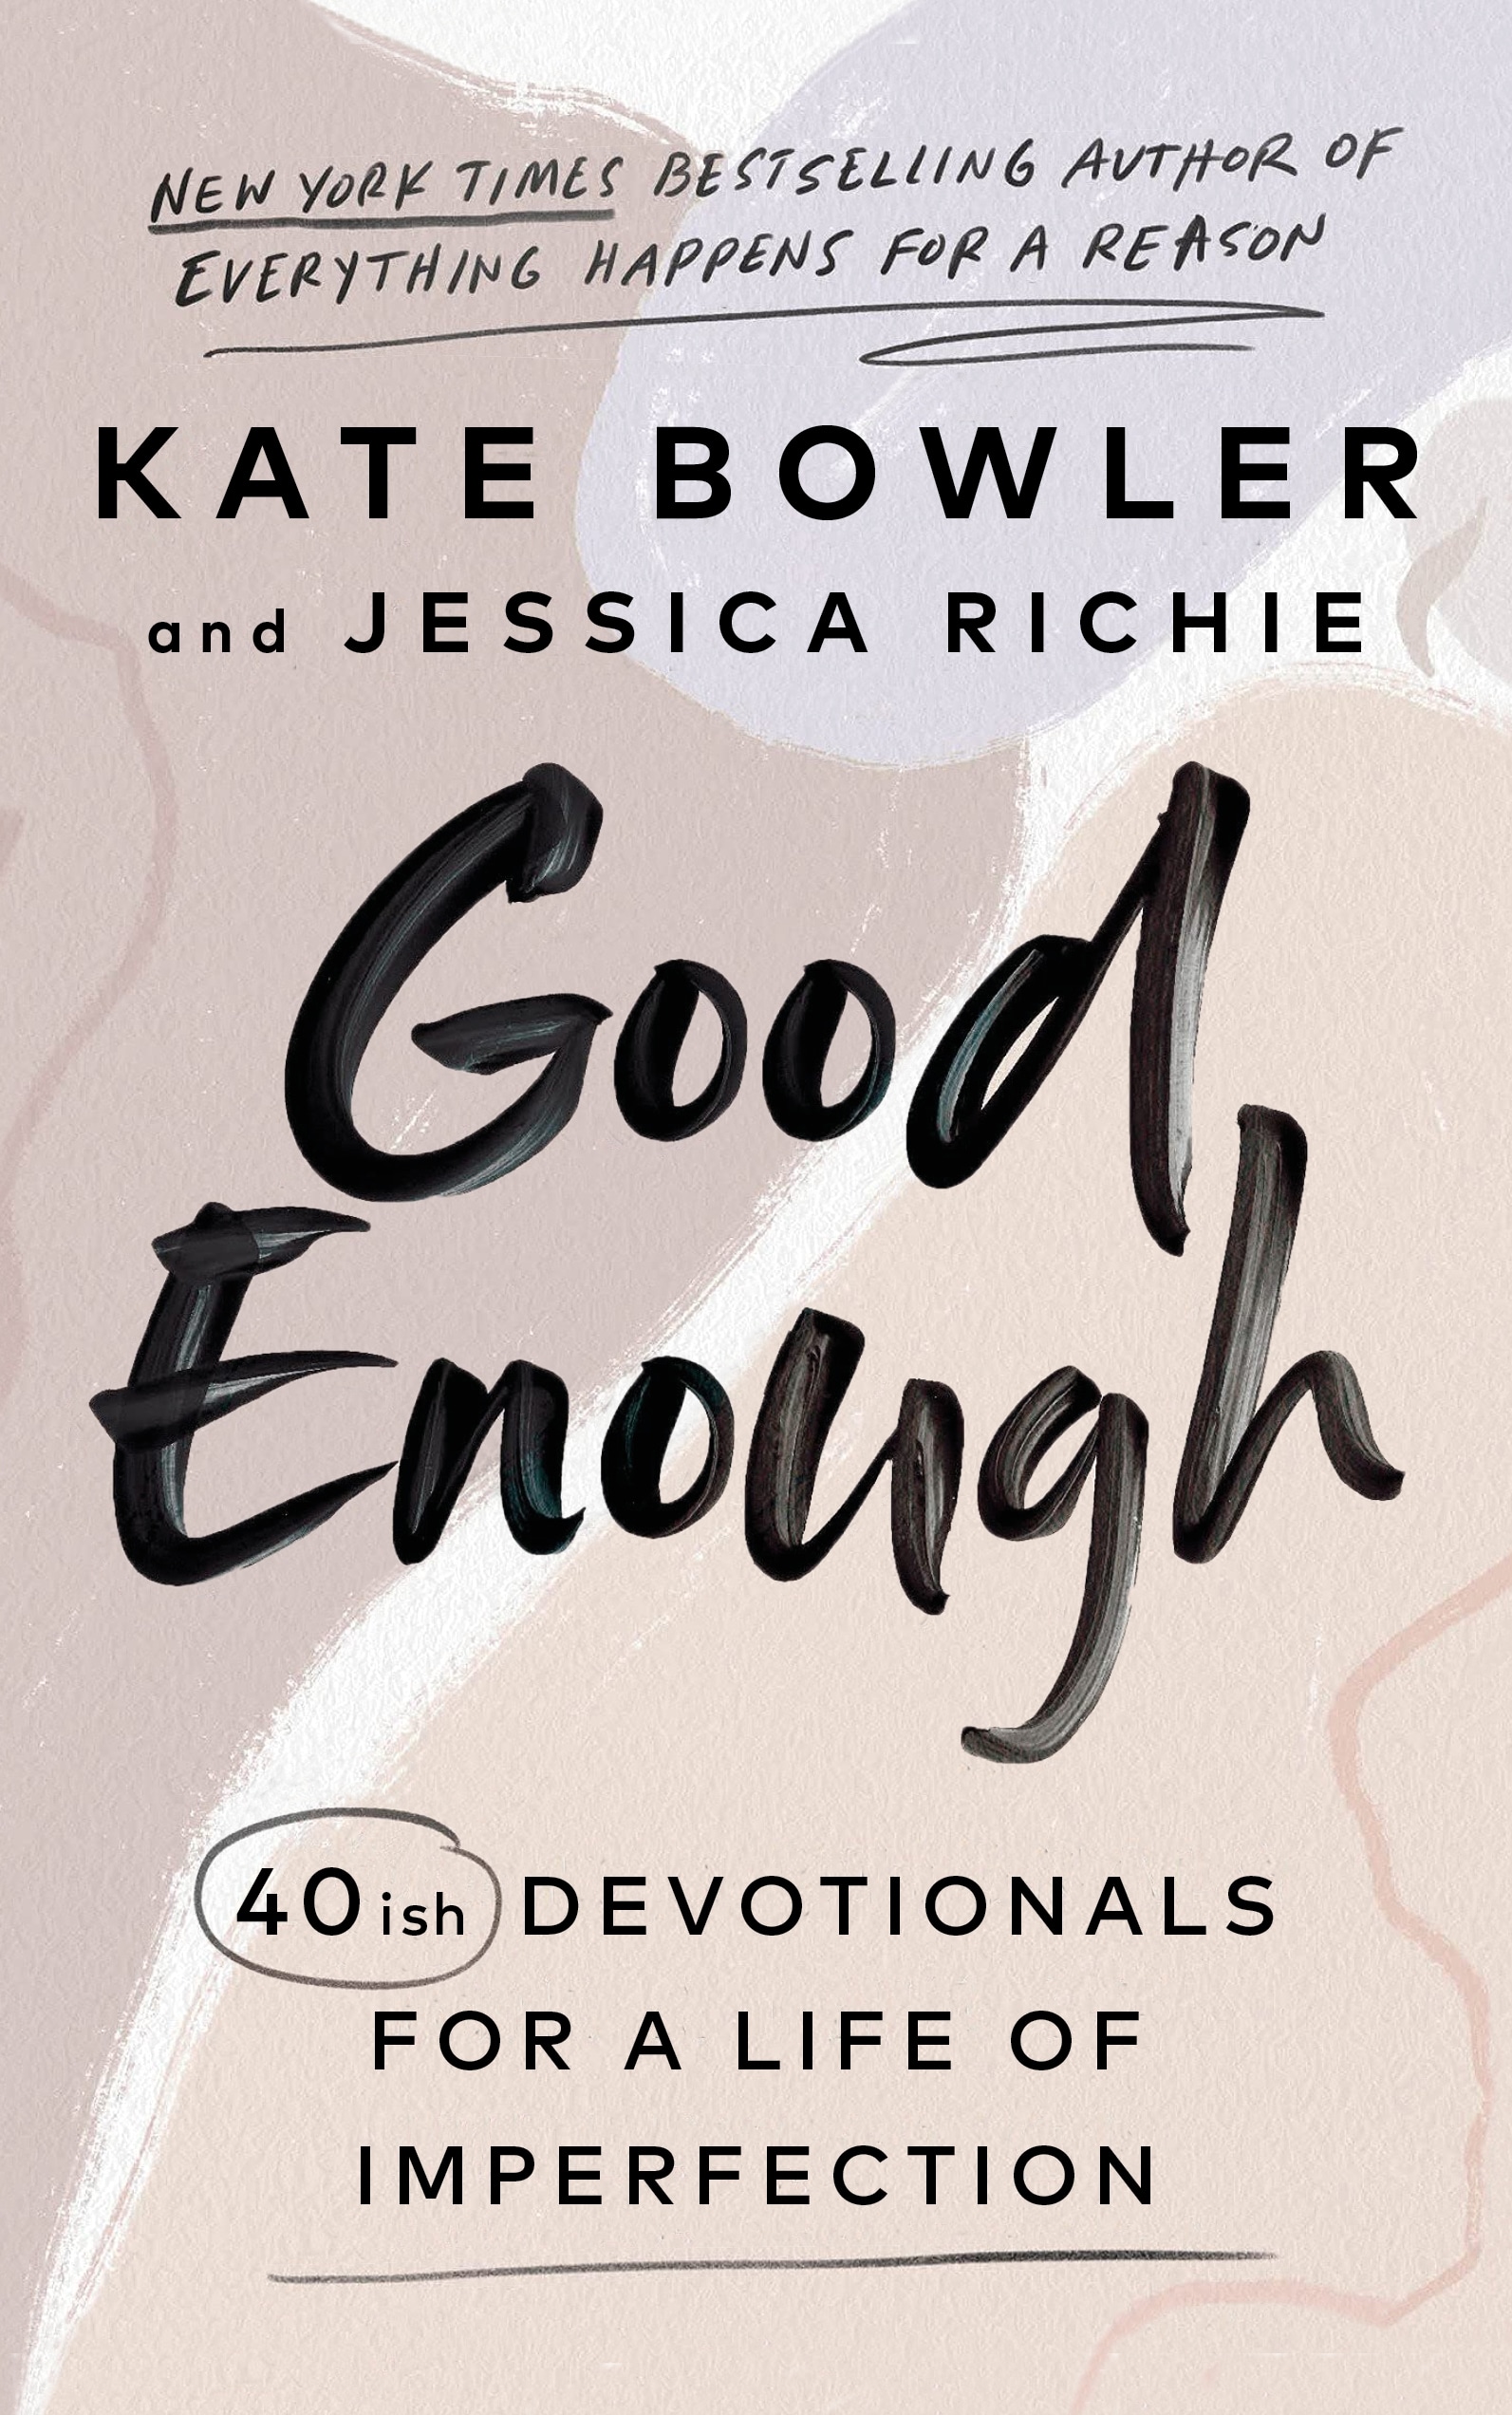 Book “Good Enough” by Kate Bowler, Jessica Richie — February 17, 2022